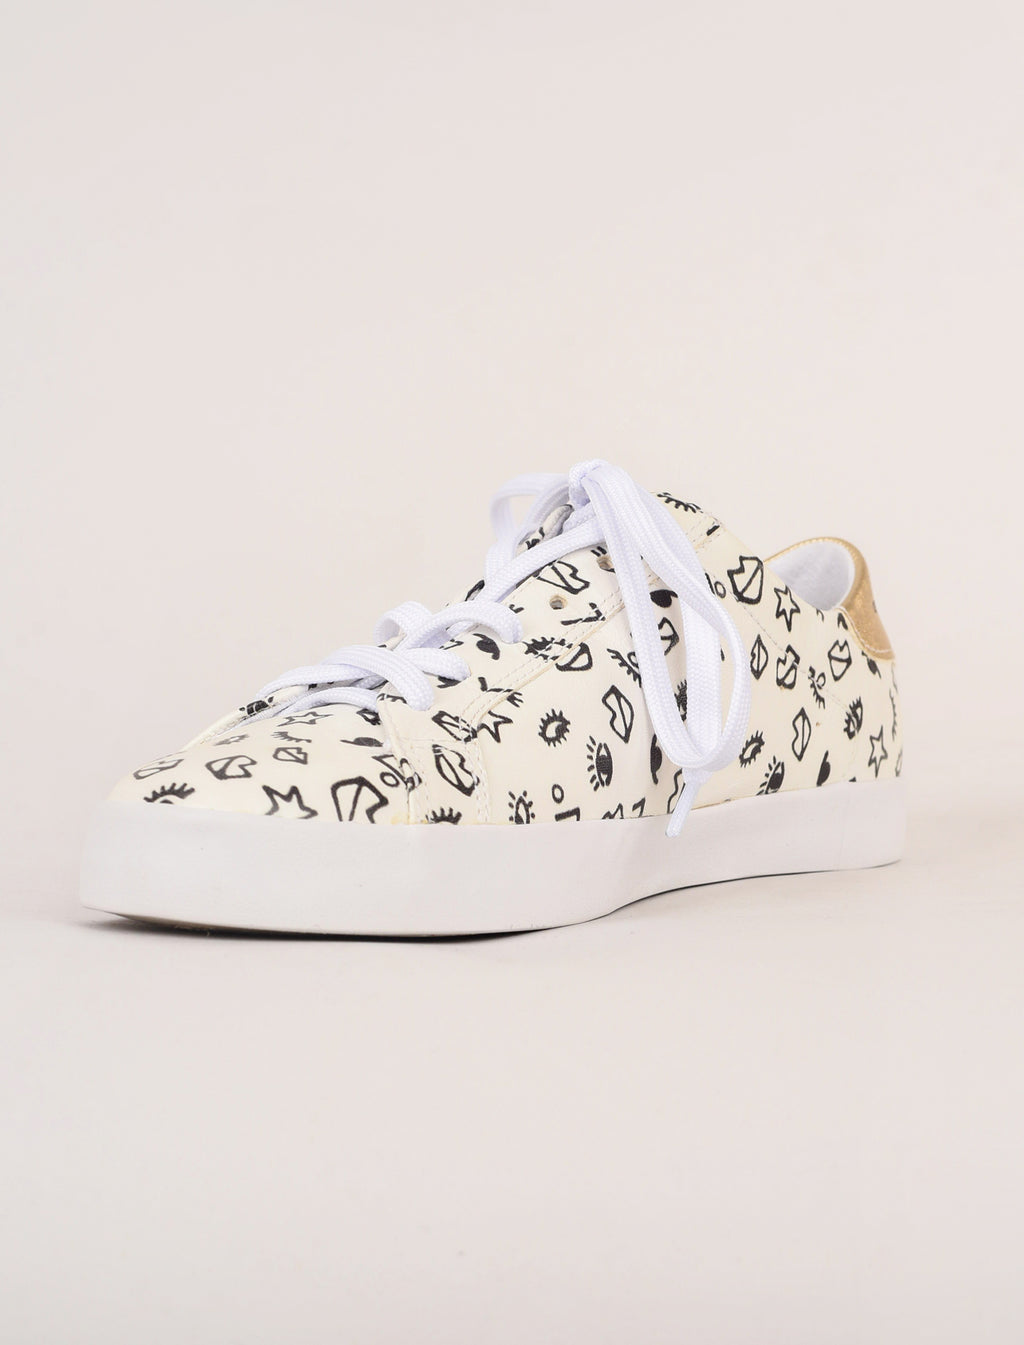 Court Wink Sneakers, White/Gold